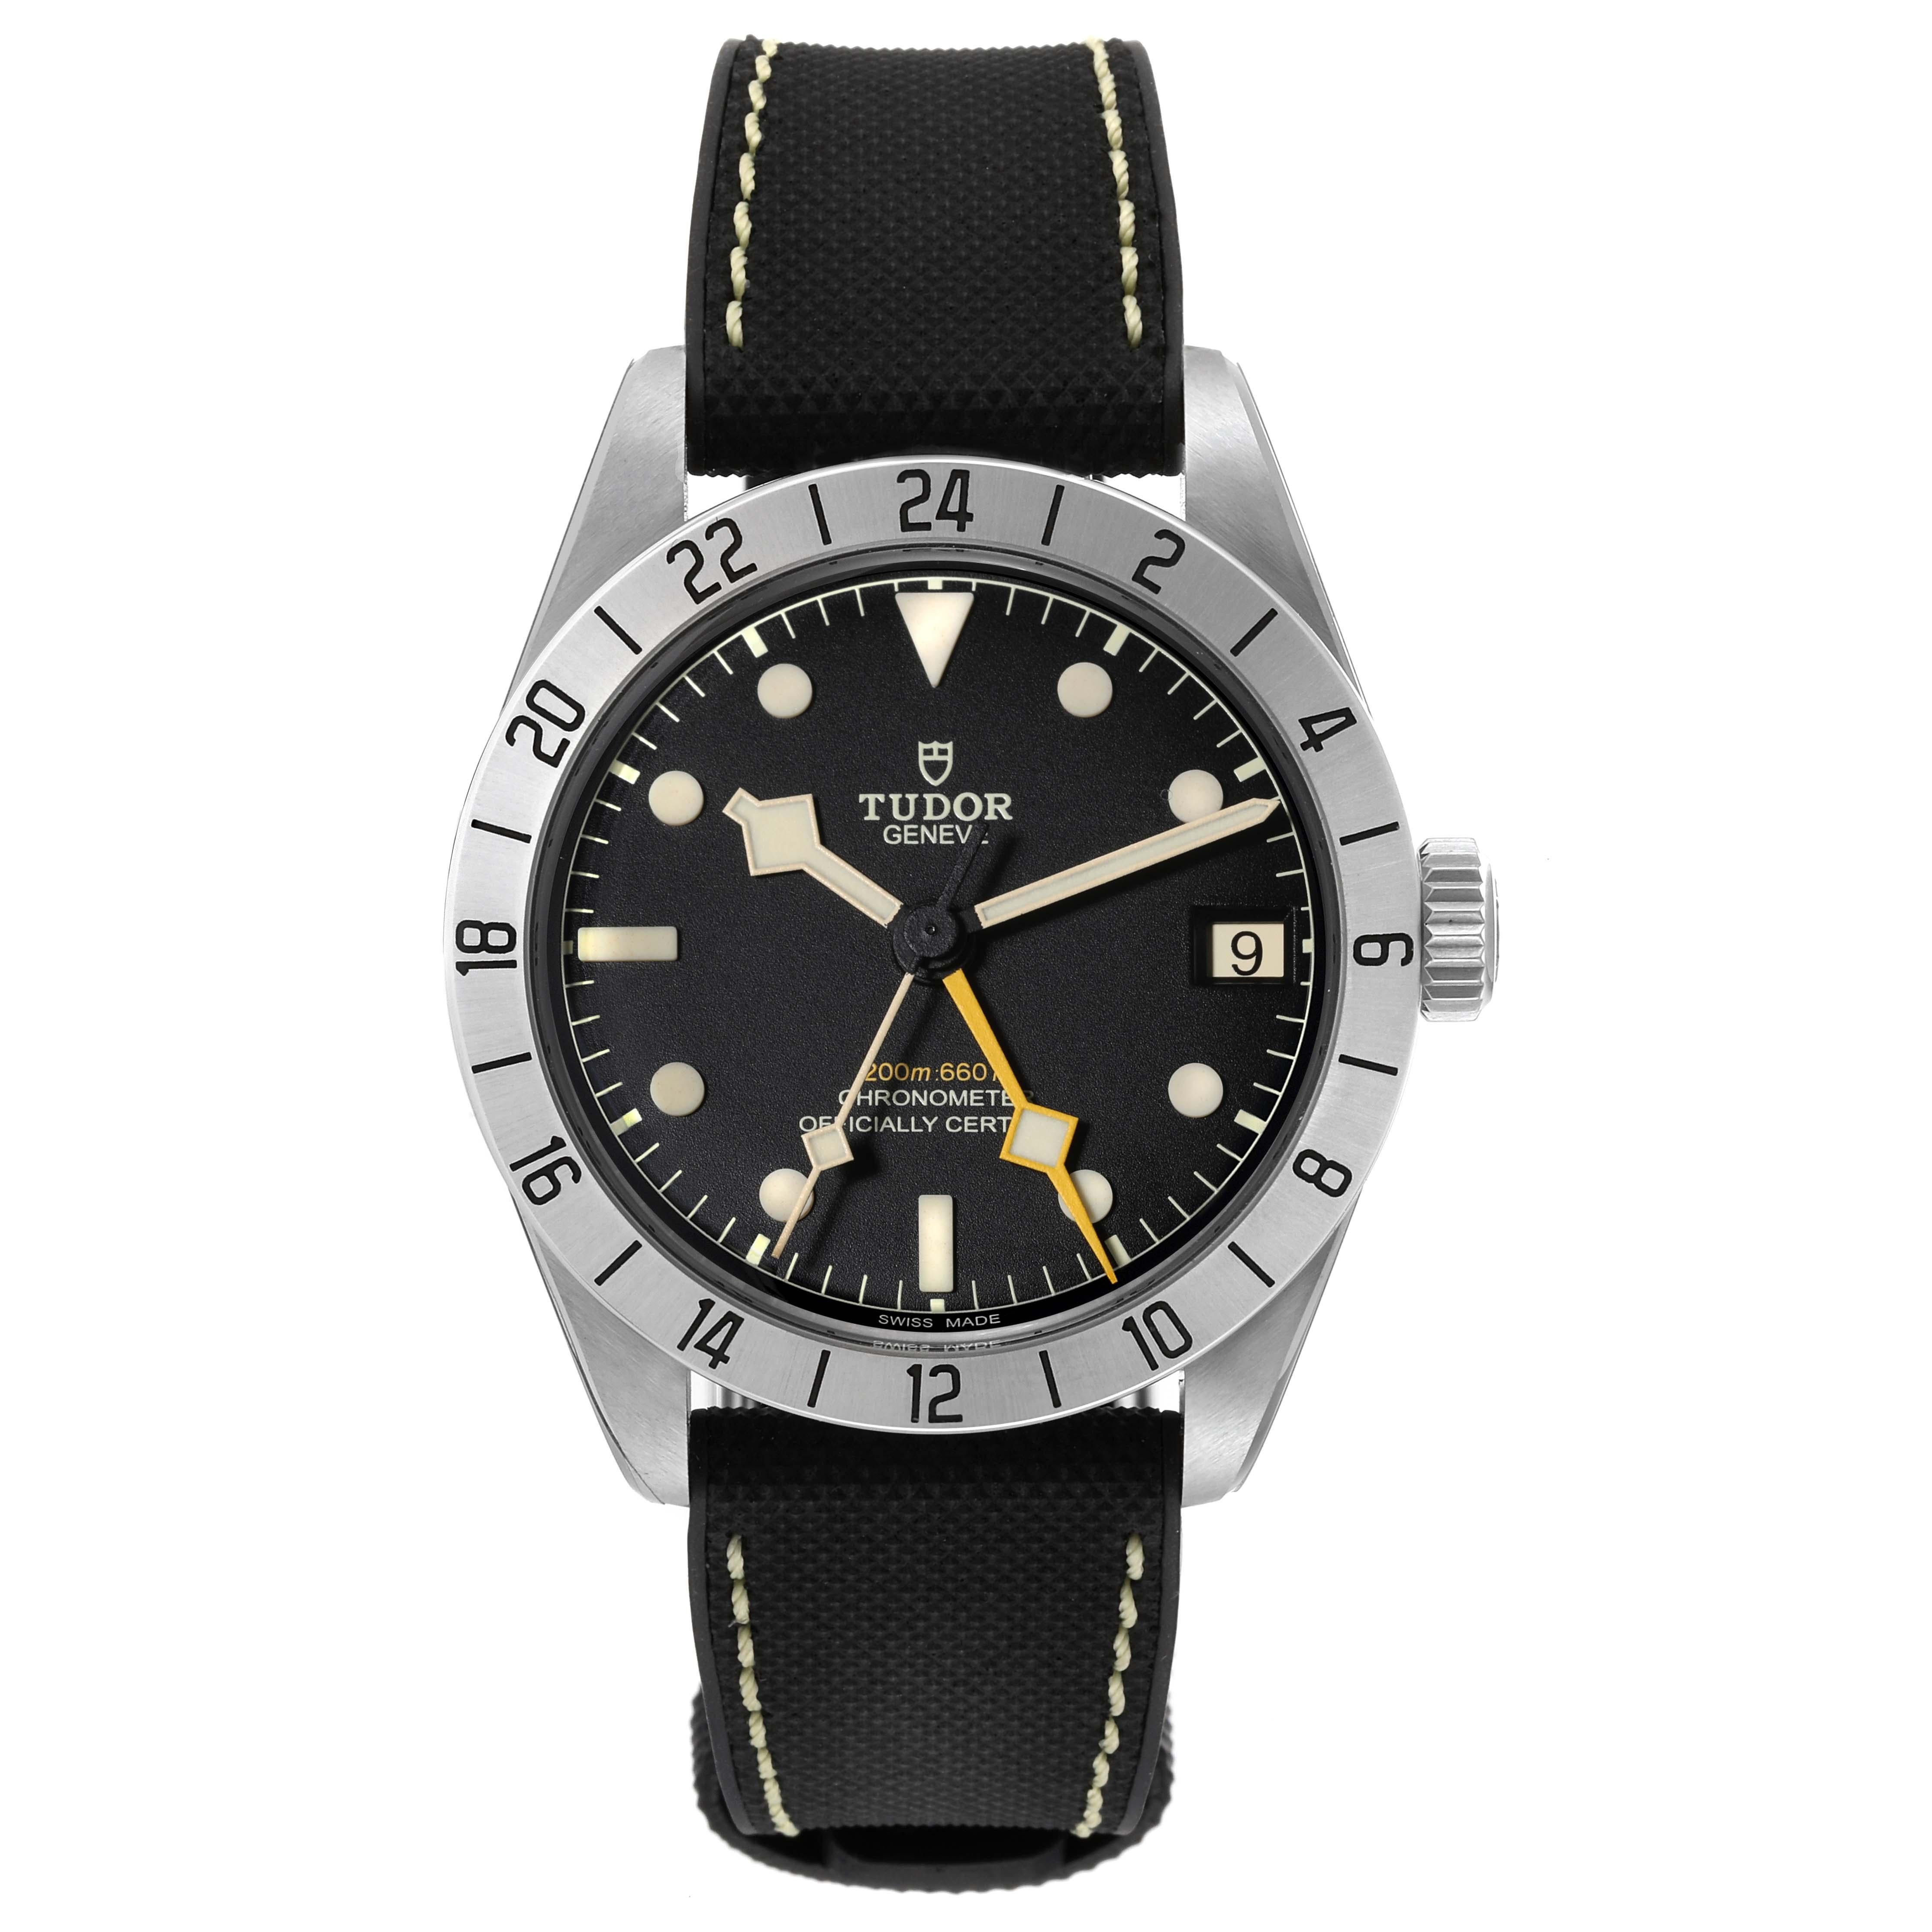 Tudor Black Bay Pro GMT Orange Hand Steel Mens Watch M79470 Unworn. Automatic self-winding movement. Stainless steel case 39.0 mm in diameter. Tudor logo on the crown. Stainless steel 24 hour graduated bezel with satin finish. Scratch resistant